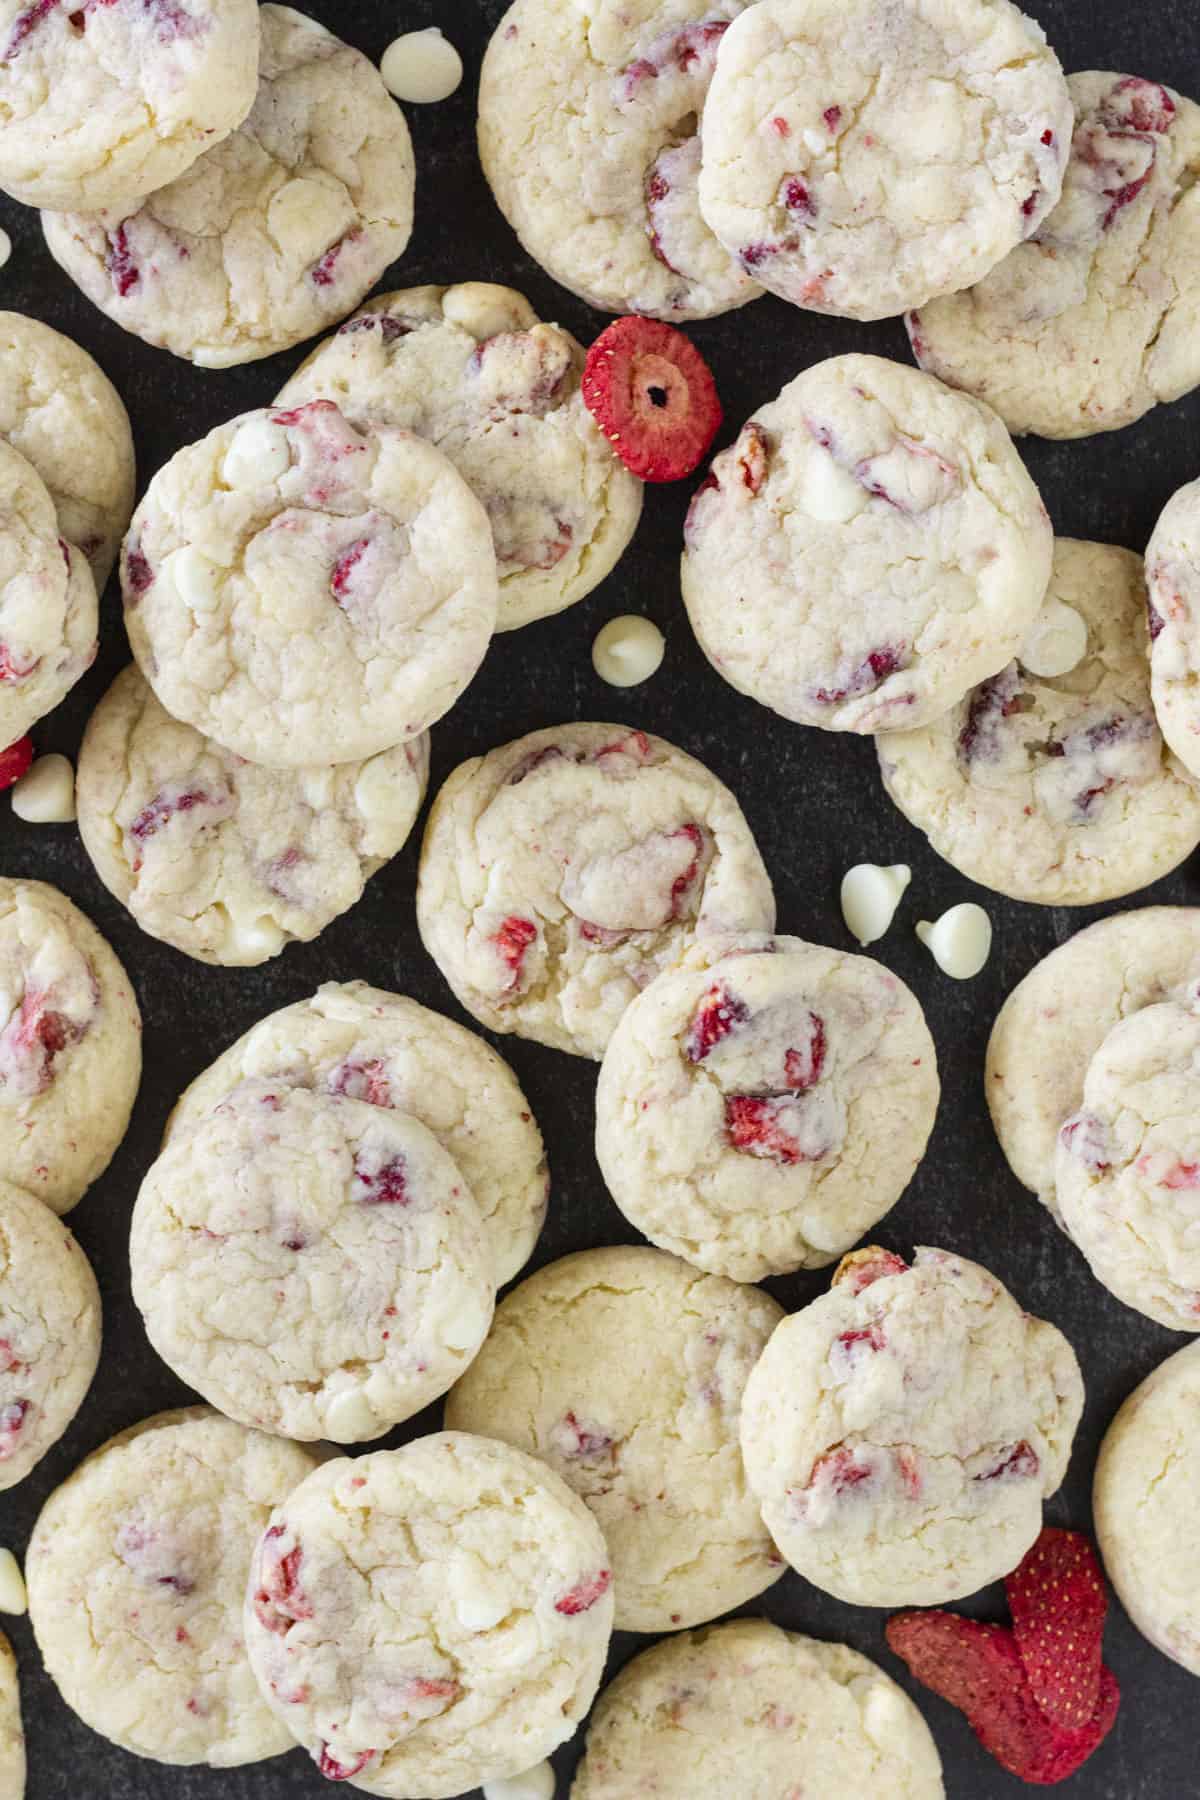 Dozens of strawberry cream cheese cookies on a black tray.